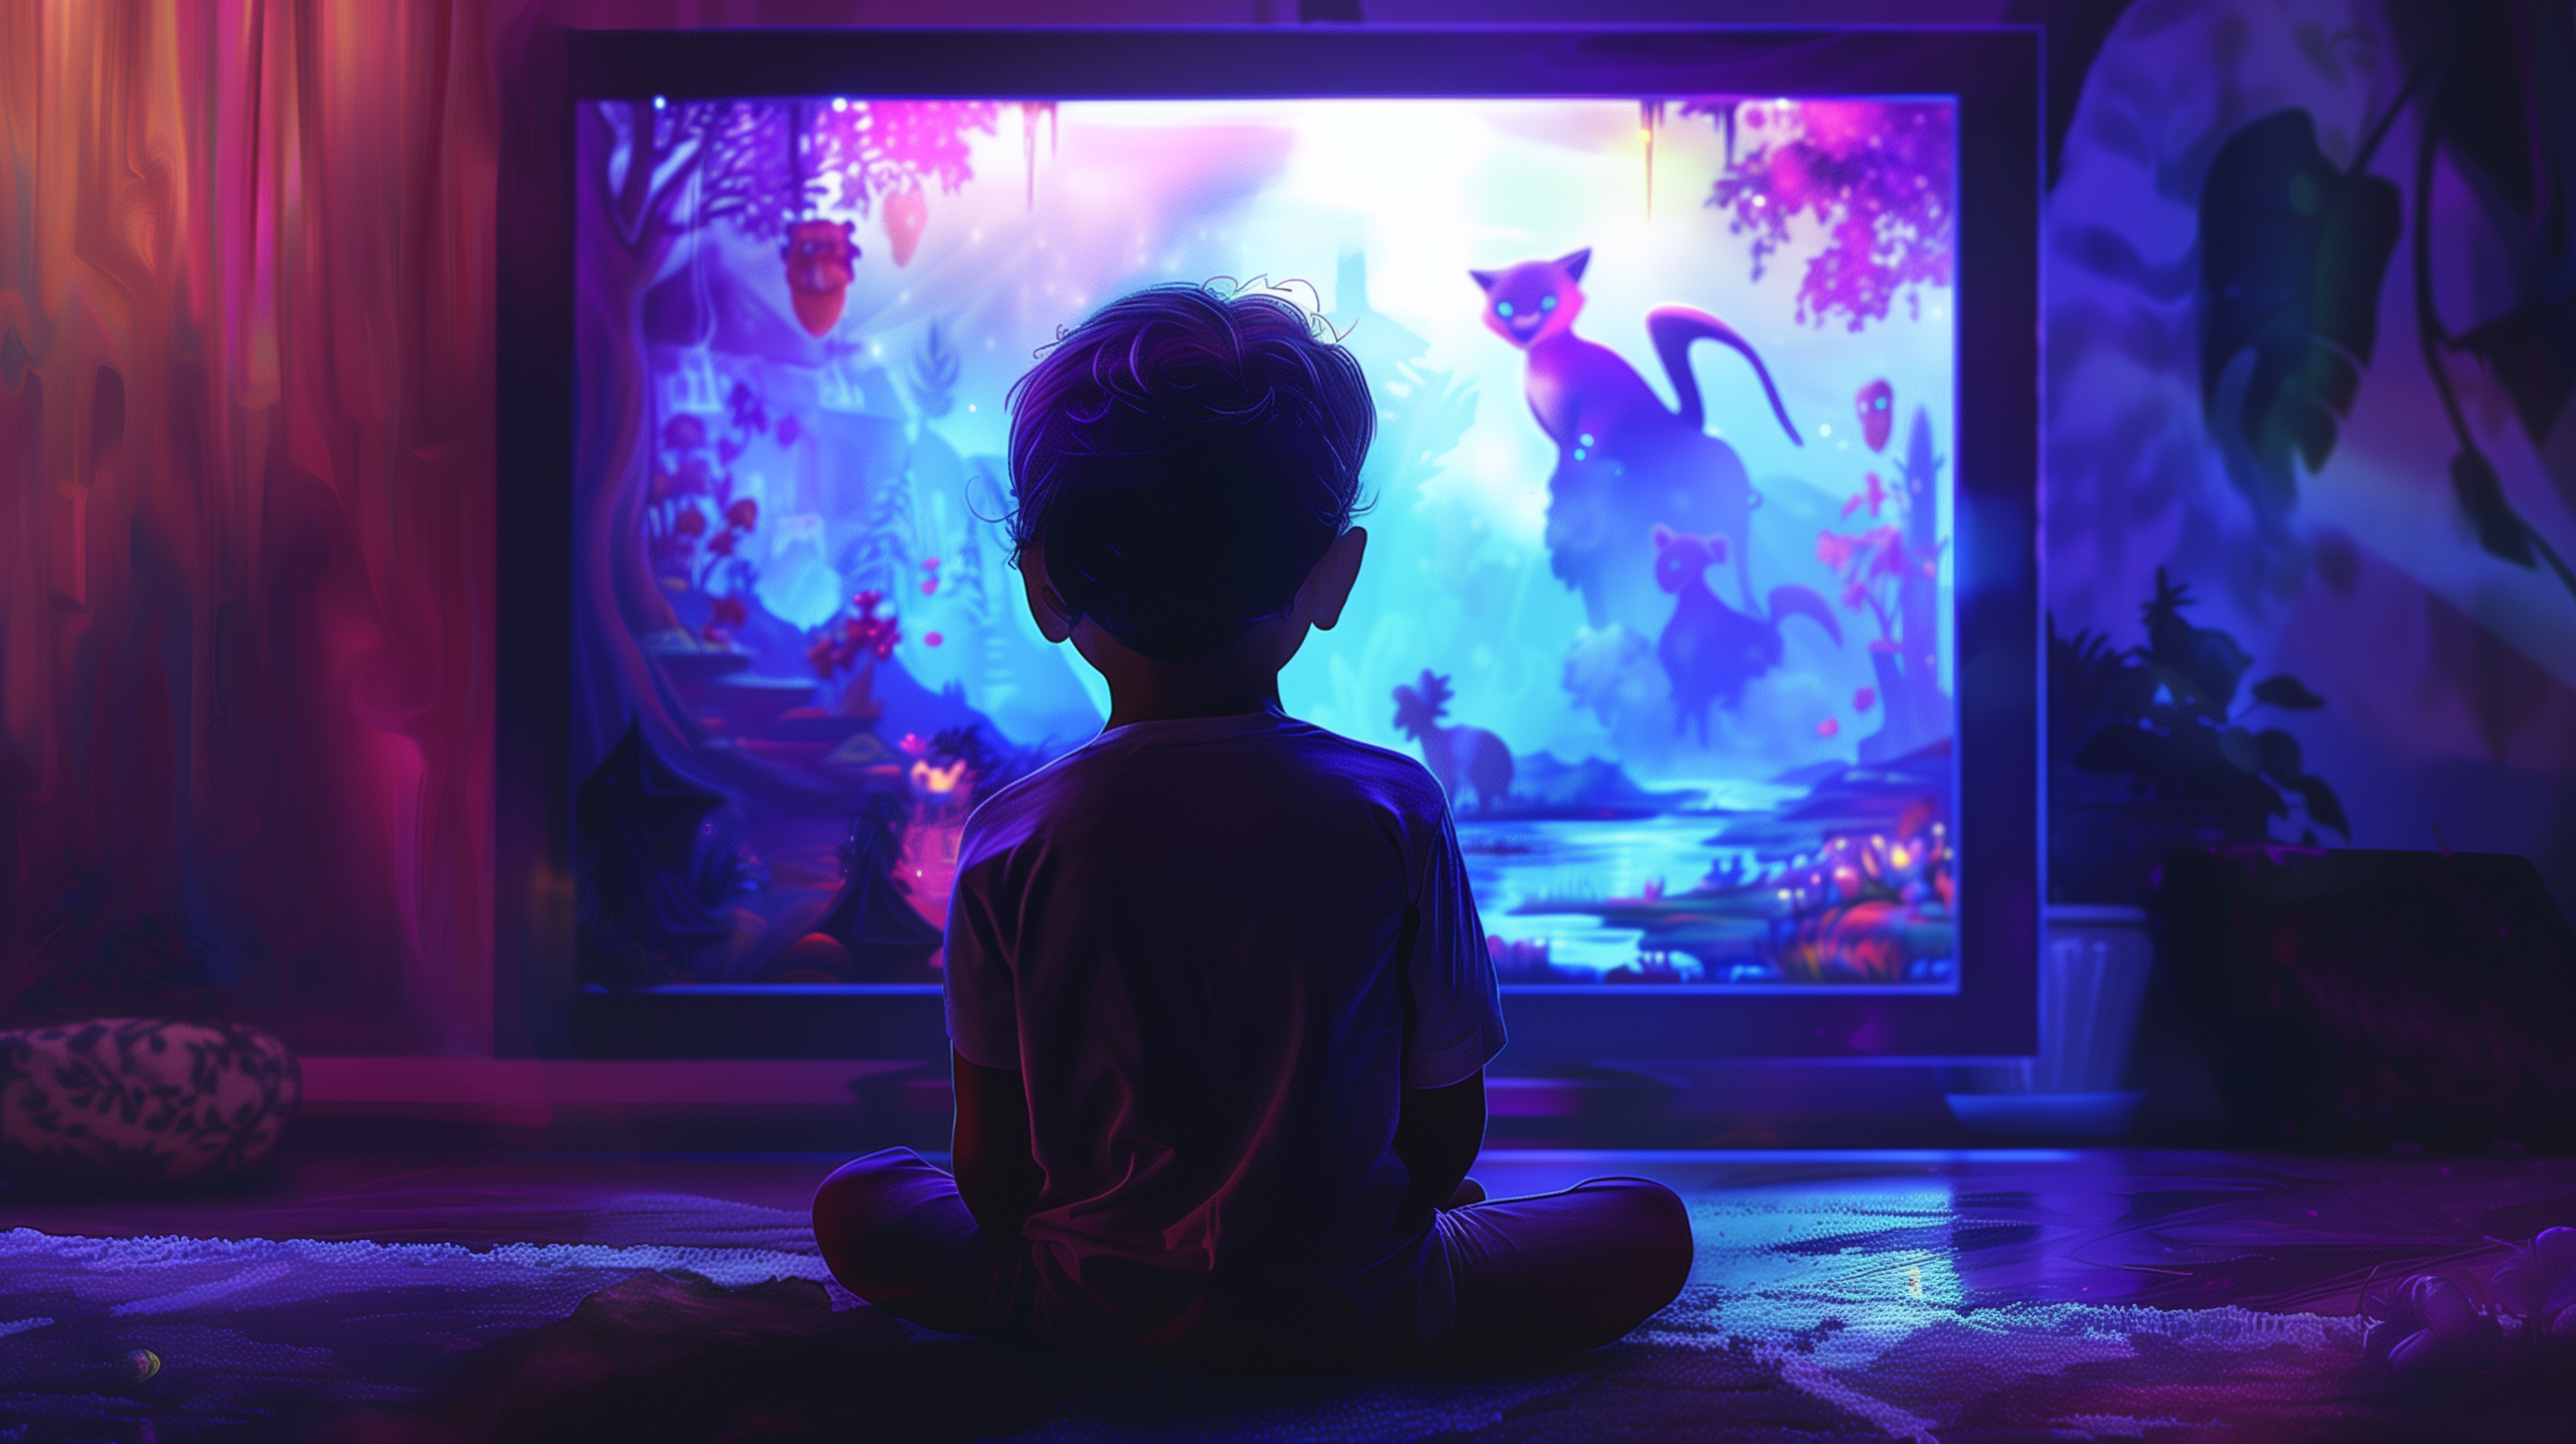 A child watching animated movies with a sense of wonder and imagination